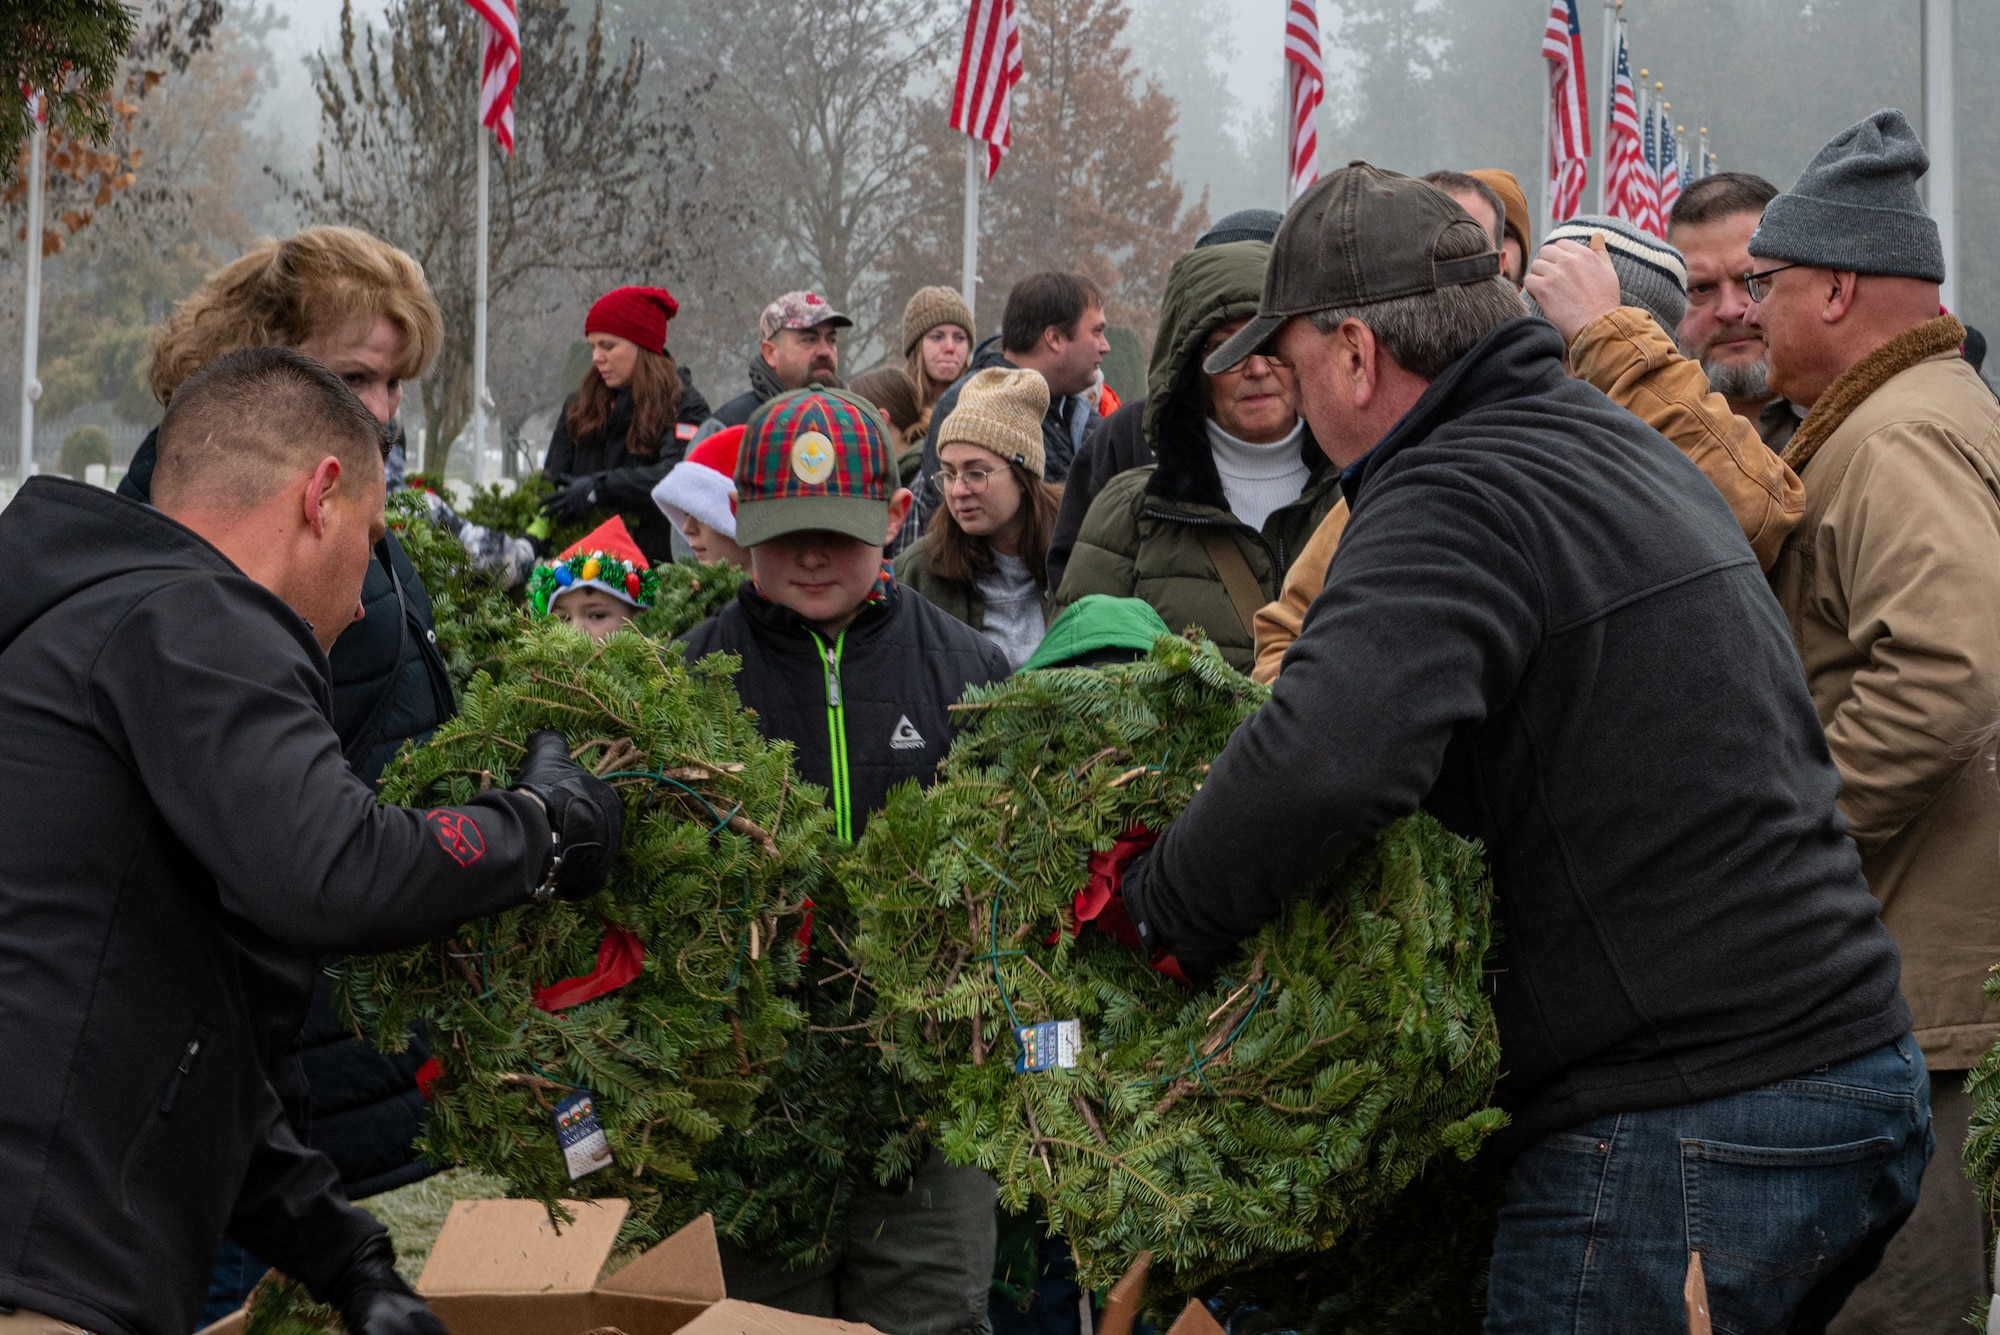 A group of people carrying wreaths